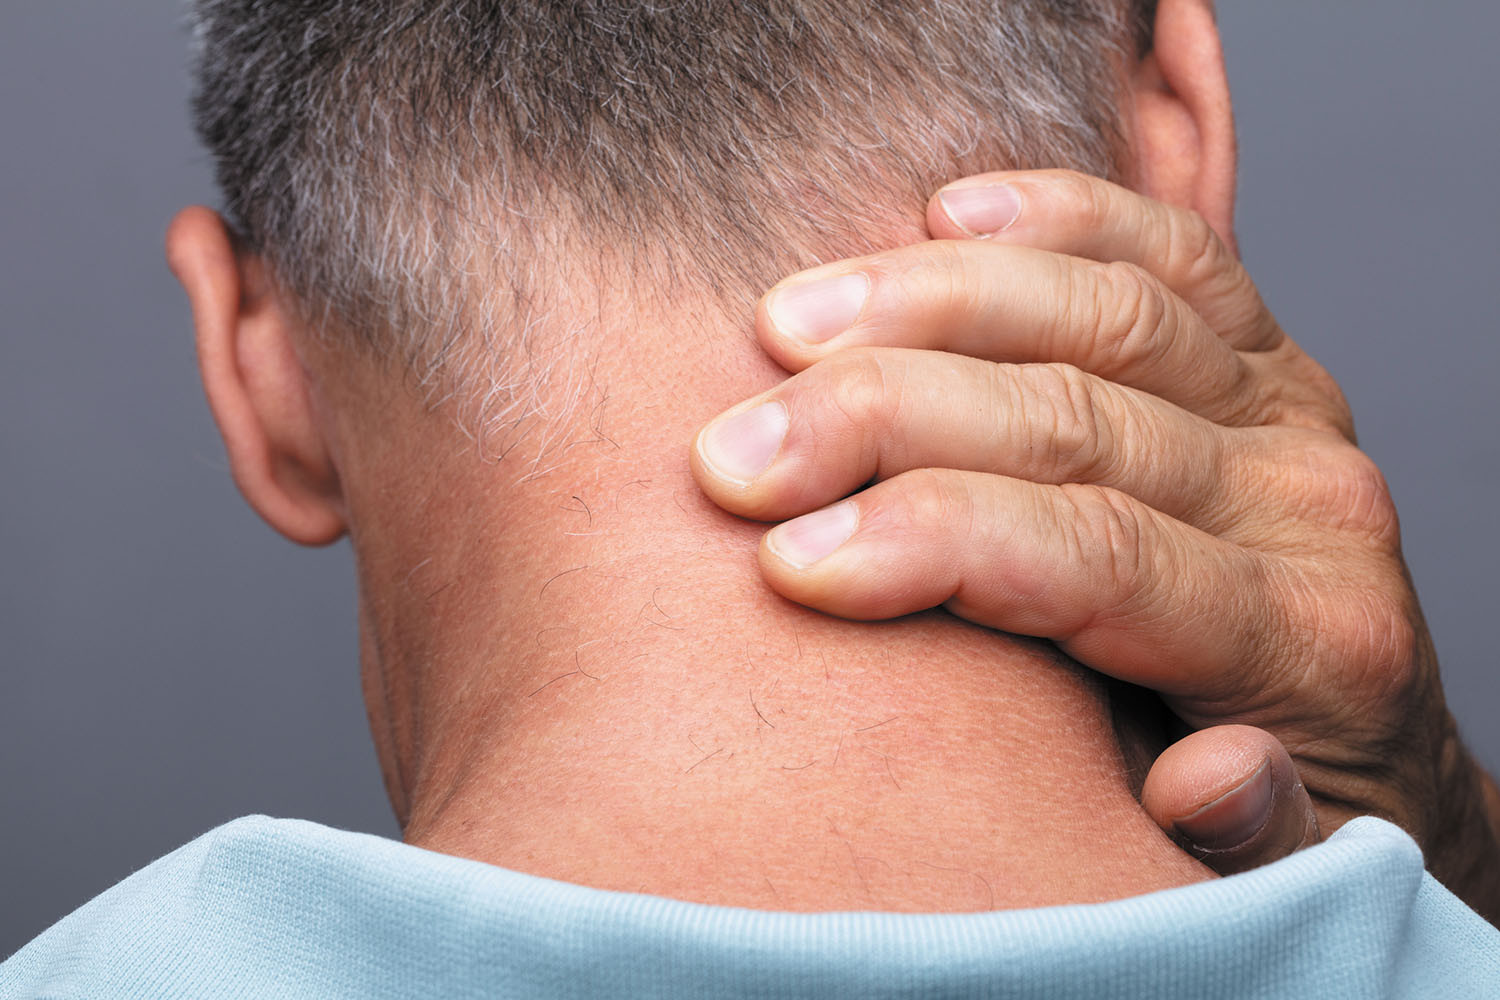 photo of the back of a man's head; he is holding his right hand on it due to pain